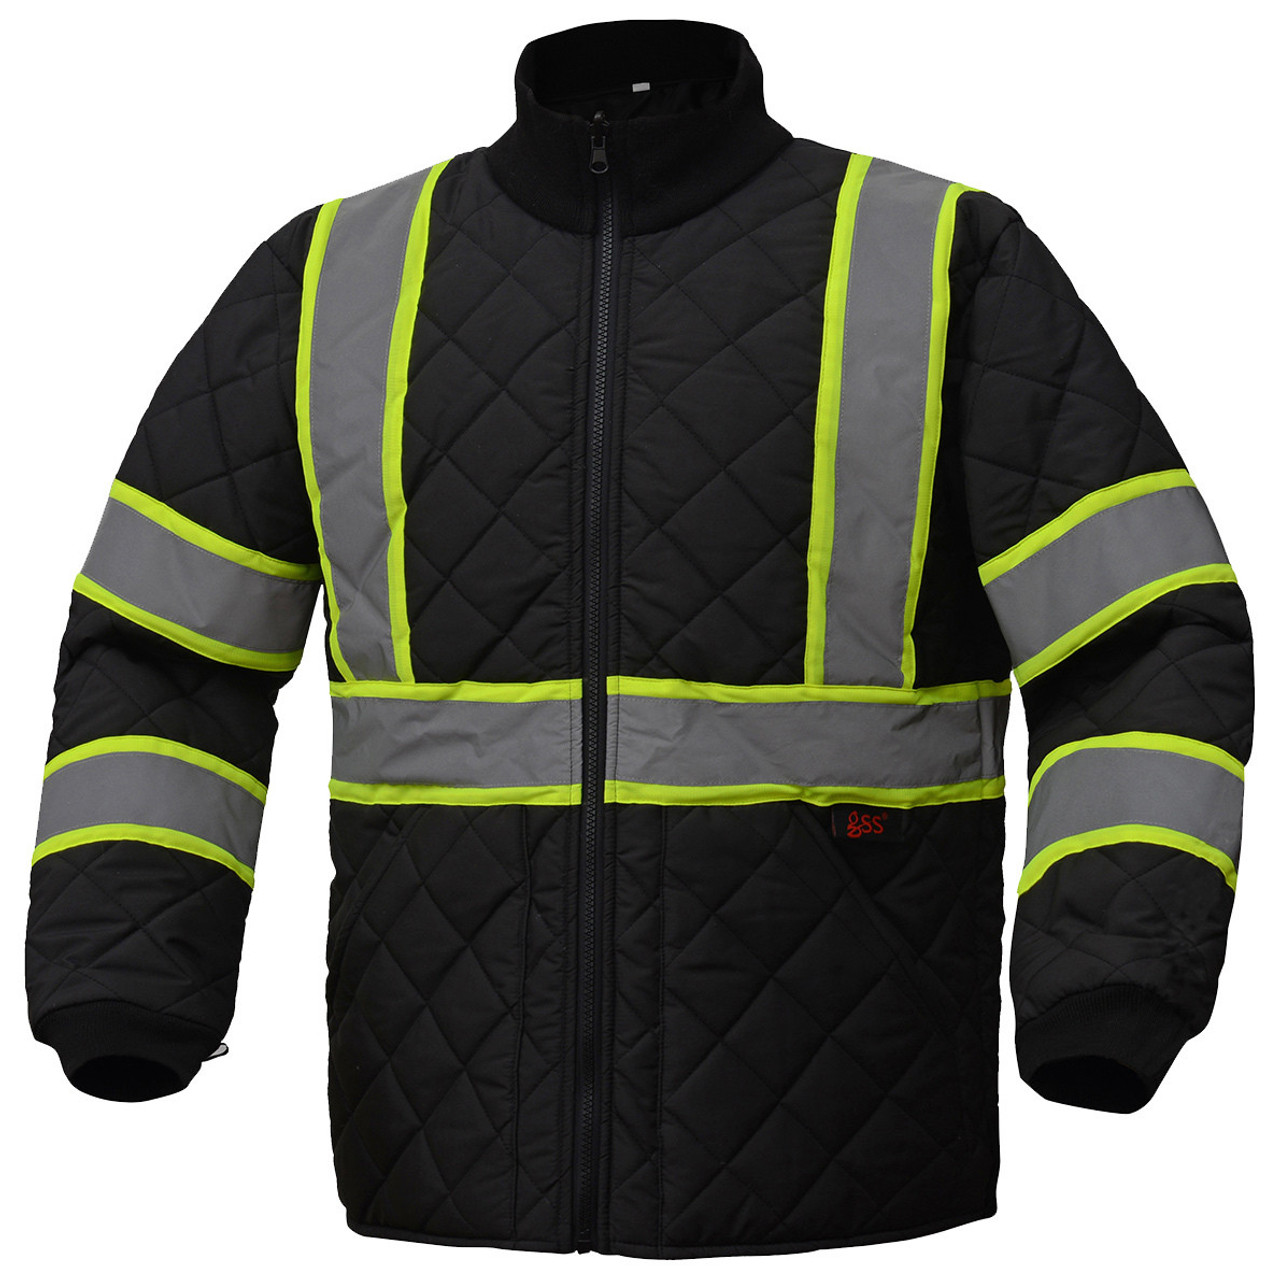 G&S Two-Tone | GSS Black Safety Hi-Vis Jacket Safety 8009 Quilted Products Non-ANSI Apparel : -